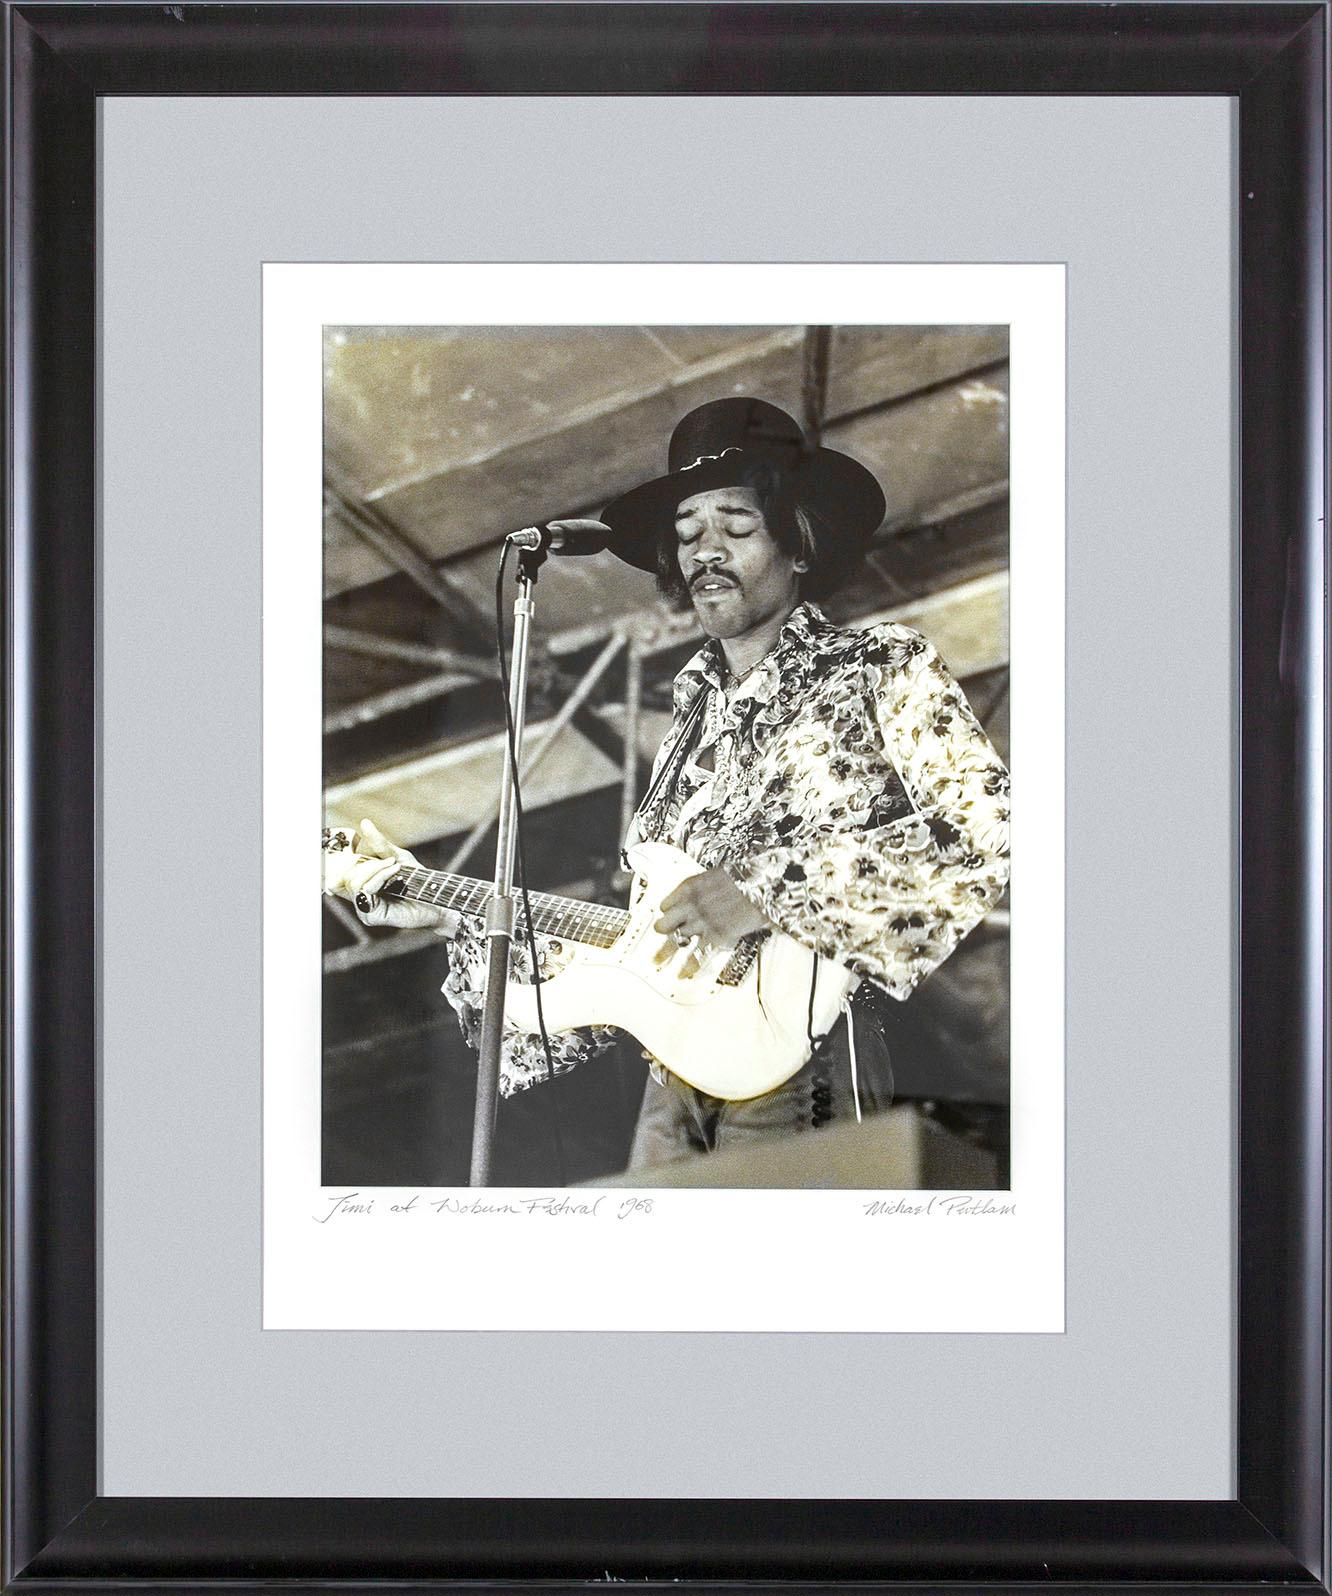 "Jimi at Woburn Festival 1968" framed black and white photograph by Michael Putland of Jimi Hendrix at the July 6, 1968, Woburn Music Festival in England.  "Jim at Woburn Festival 1968" hand written on front lower left corner. "Michael Putland" hand